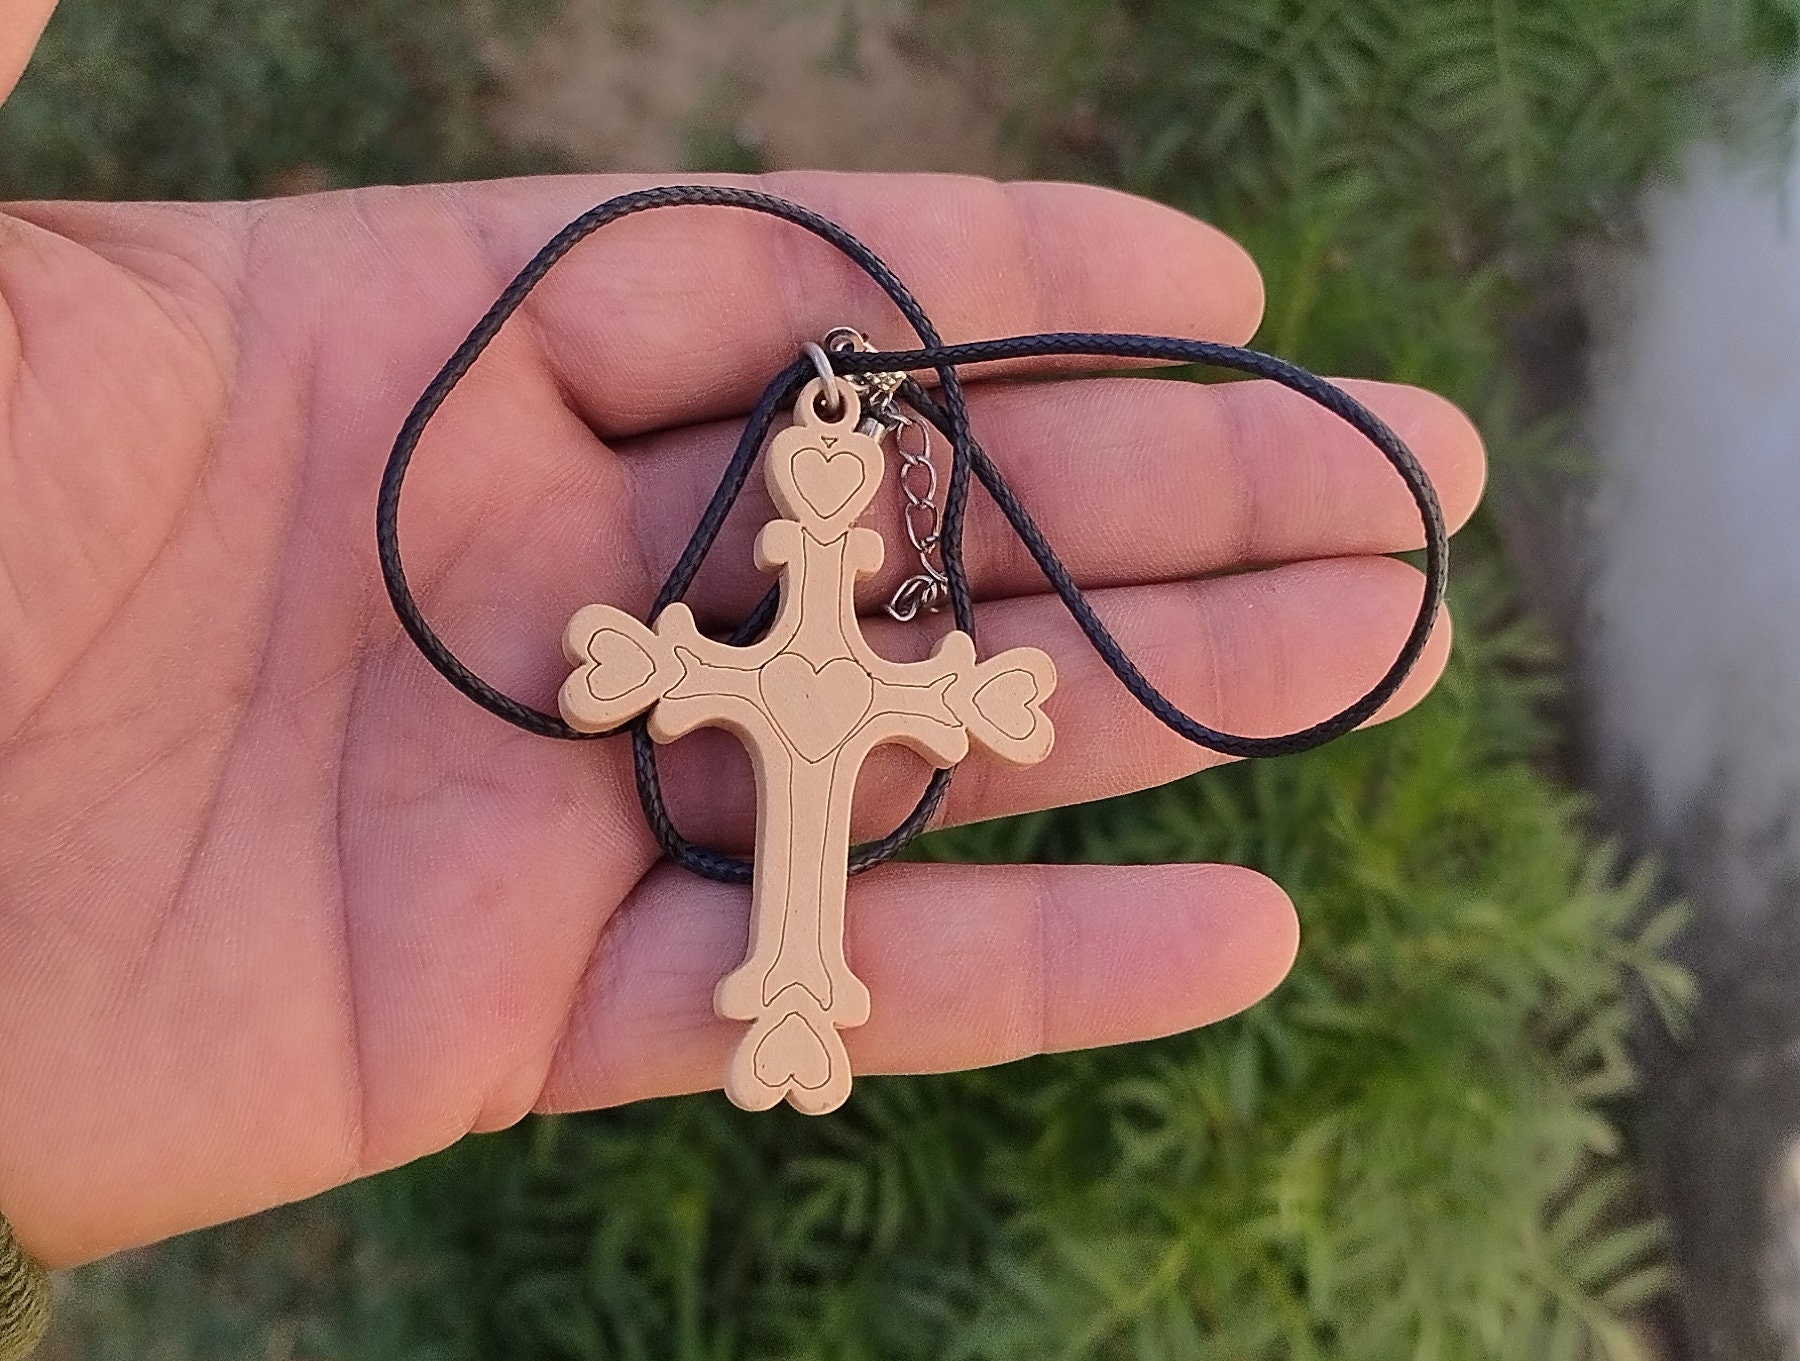 Simple Handmade Christian Wooden Cross Necklace Natural Walnut Cross Necklace for Easter, Christmas, More! Wood Cross necklace! Wood Cross